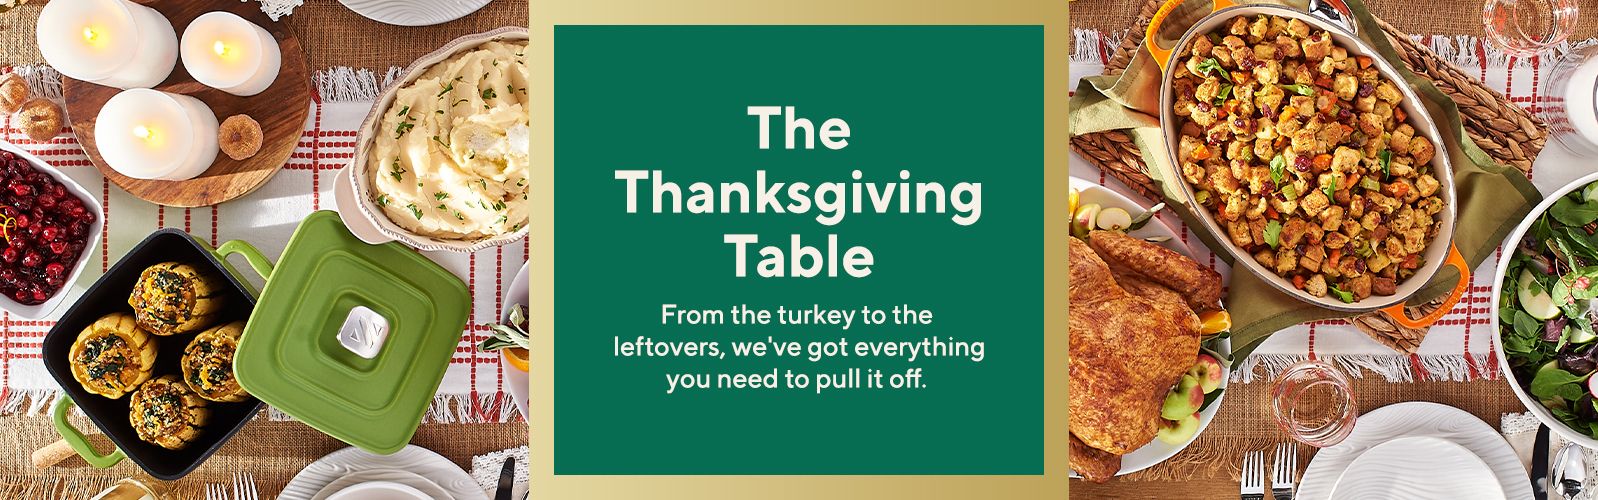 The Thanksgiving Table   It's the meal everyone waits for—& we've got everything you need to pull it off. 